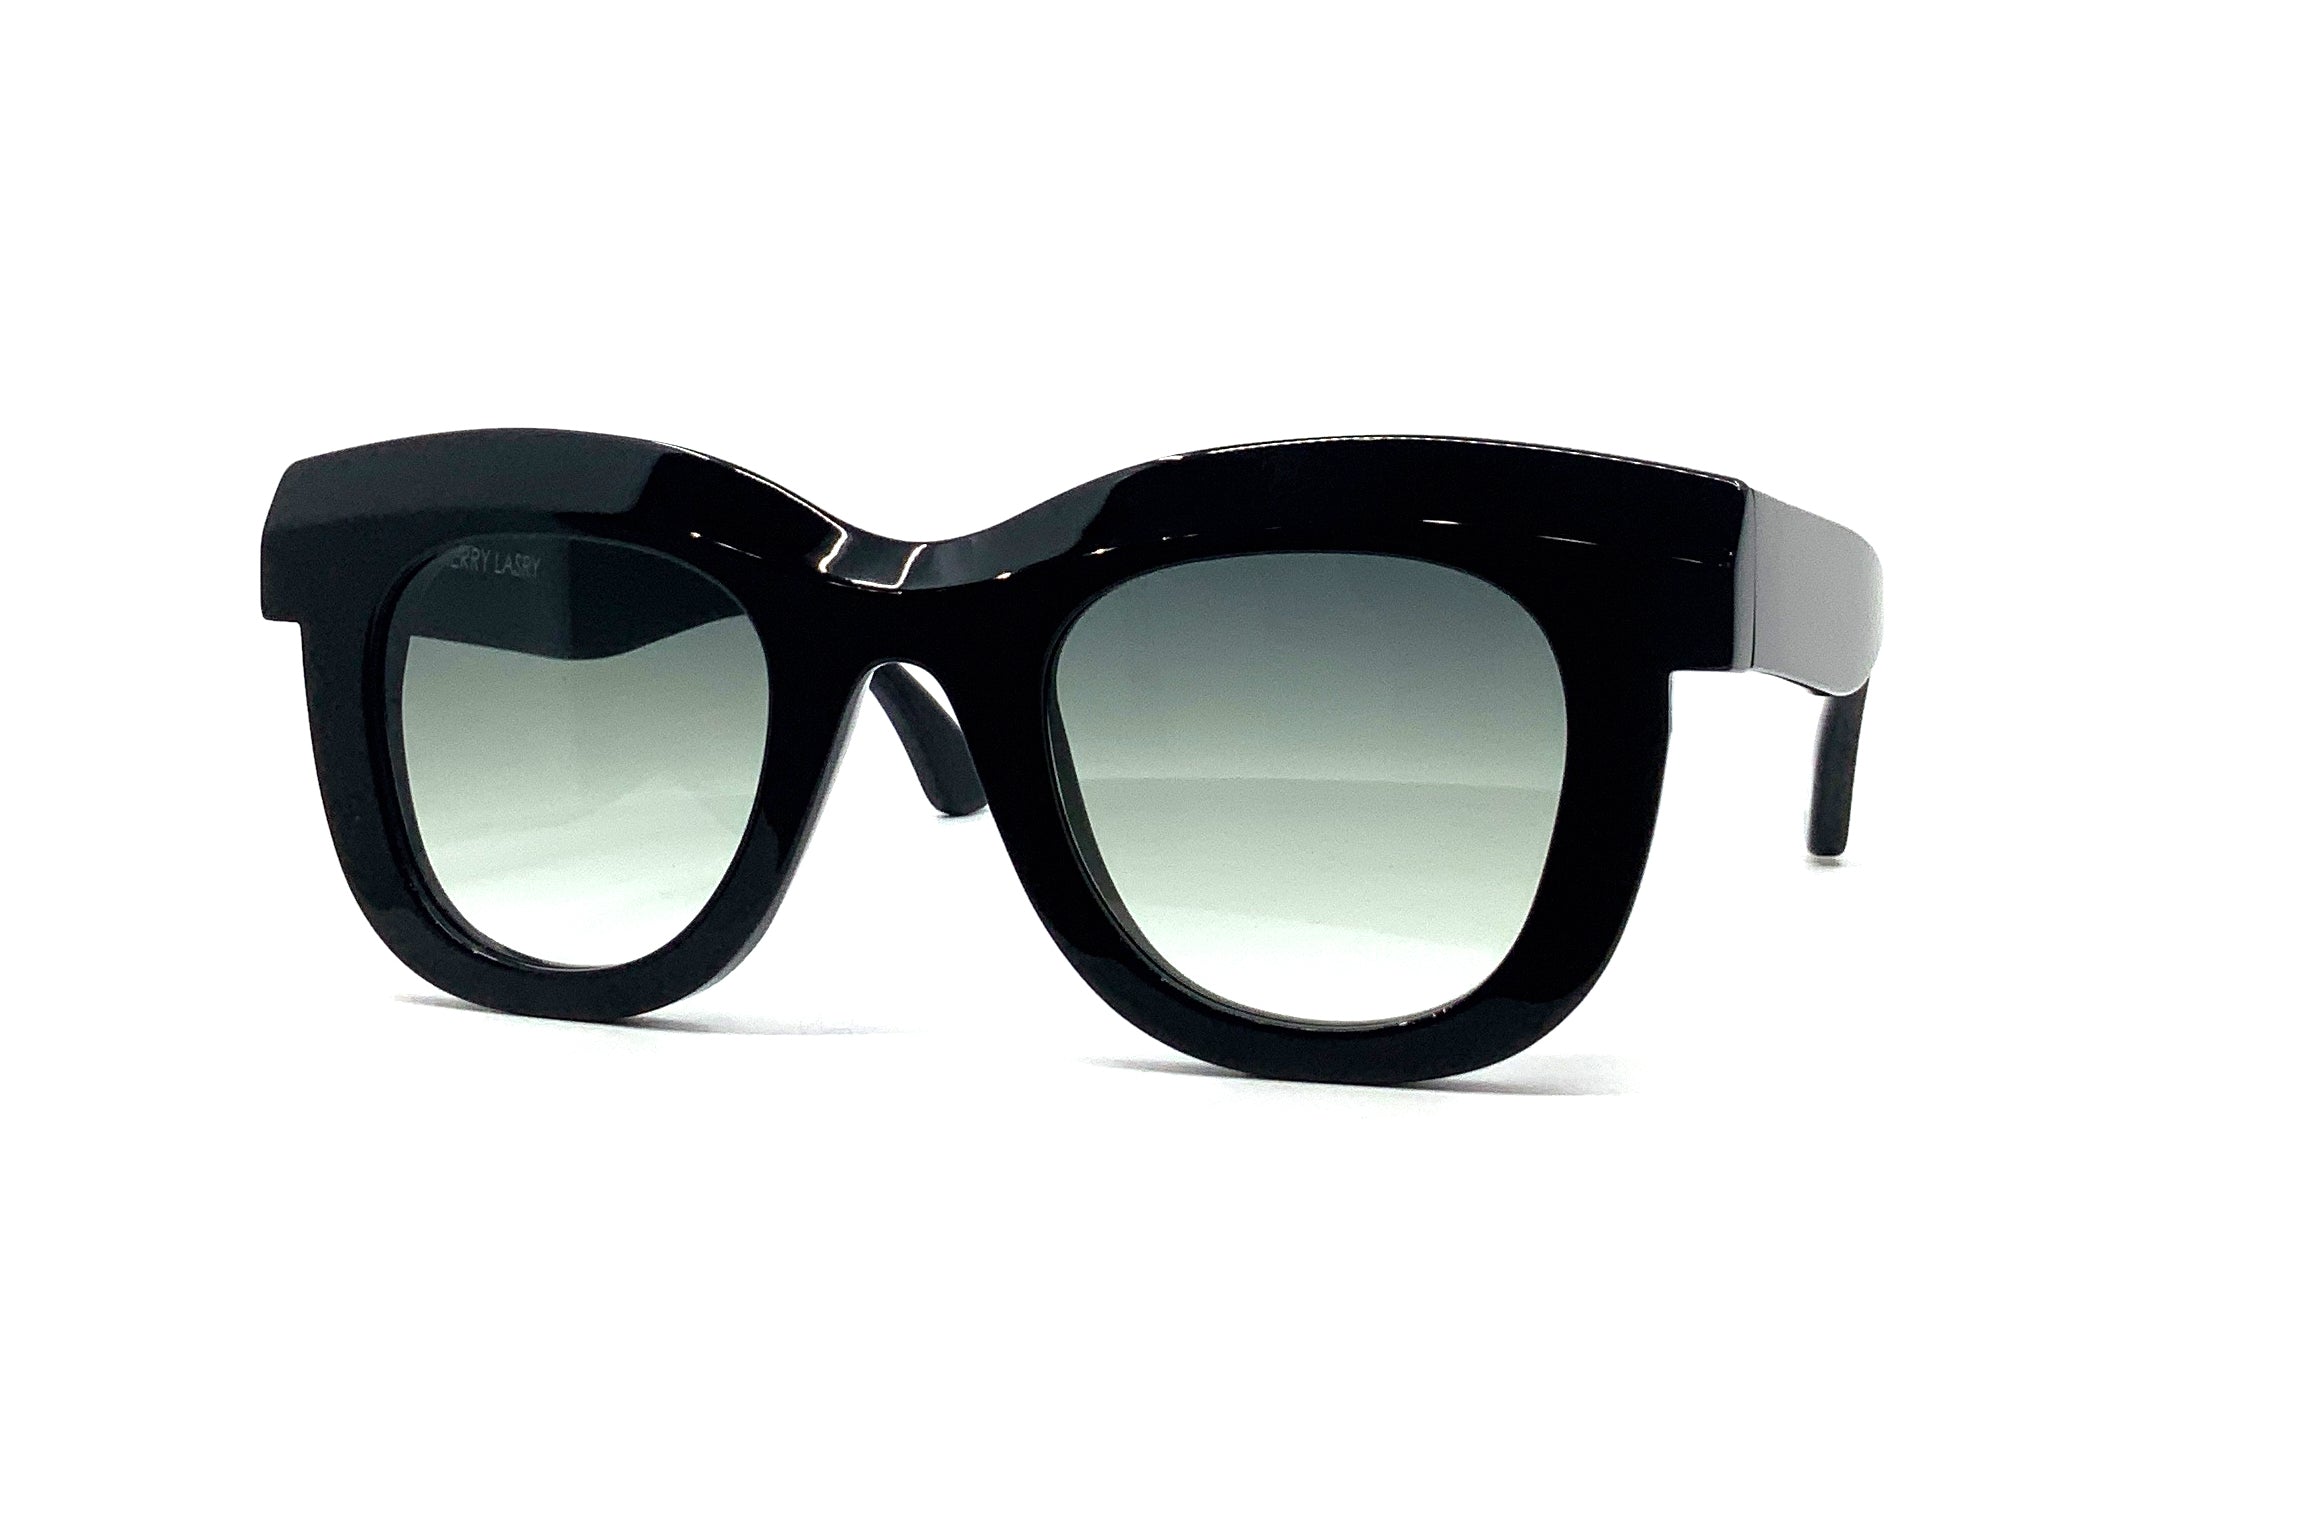 Thierry Lasry - Saucy (Black)